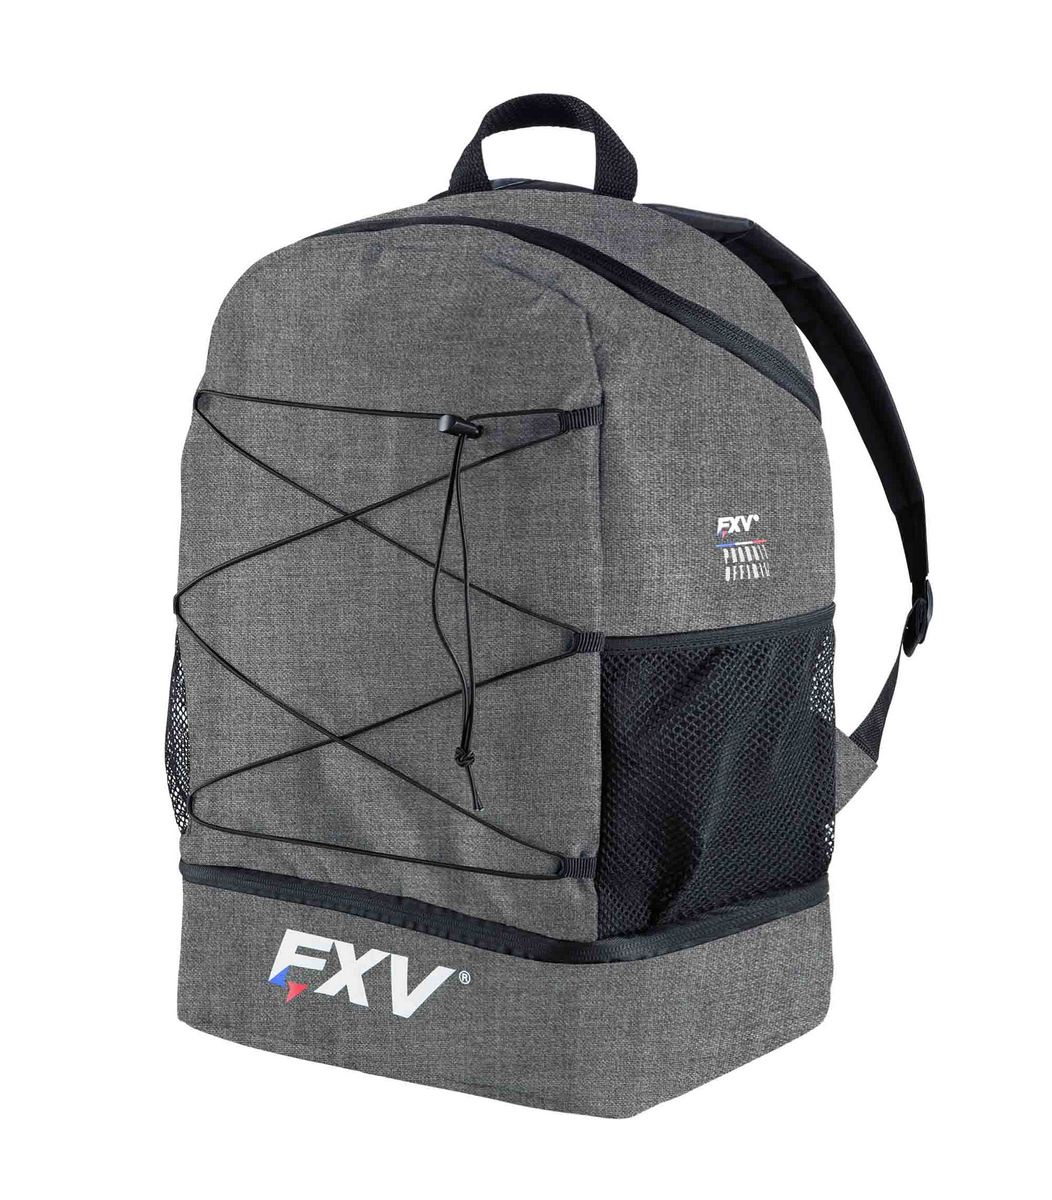 Sac a dos de rugby Force XV FORCE PLUS gris